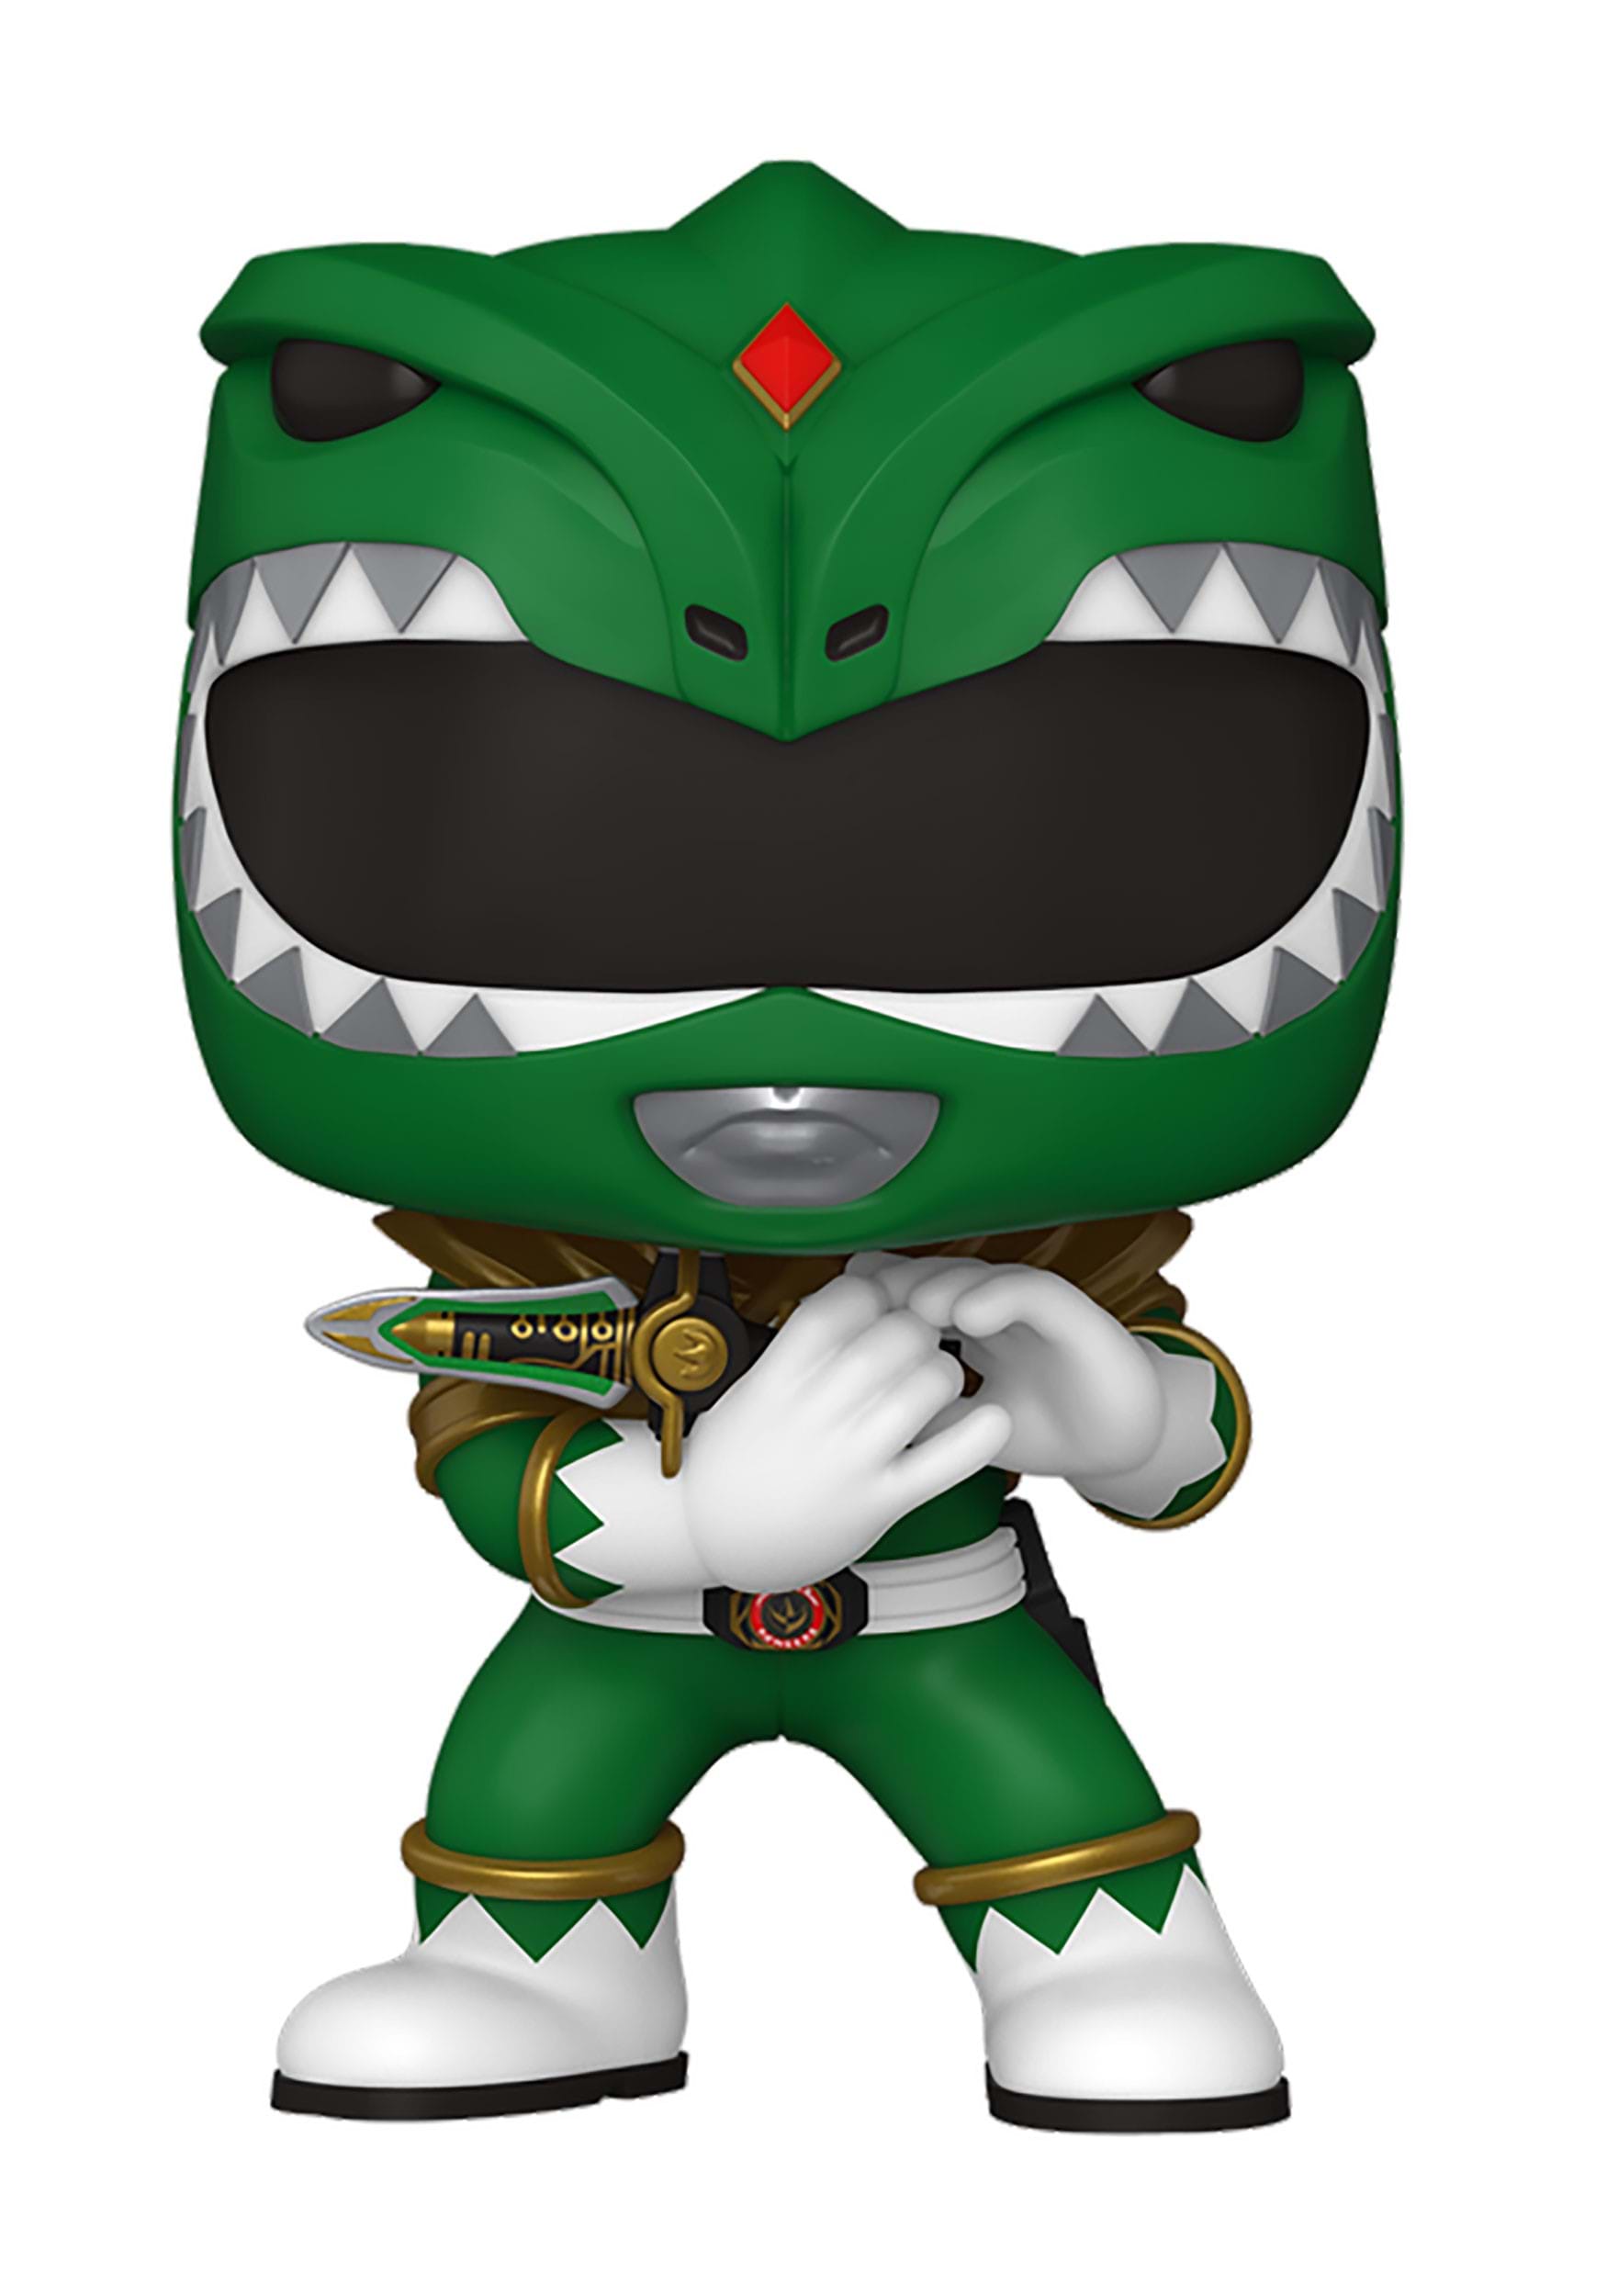 https://images.fun.com/products/93976/1-1/pop-tv-mighty-morphin-power-rangers-30th-green-ranger.jpg